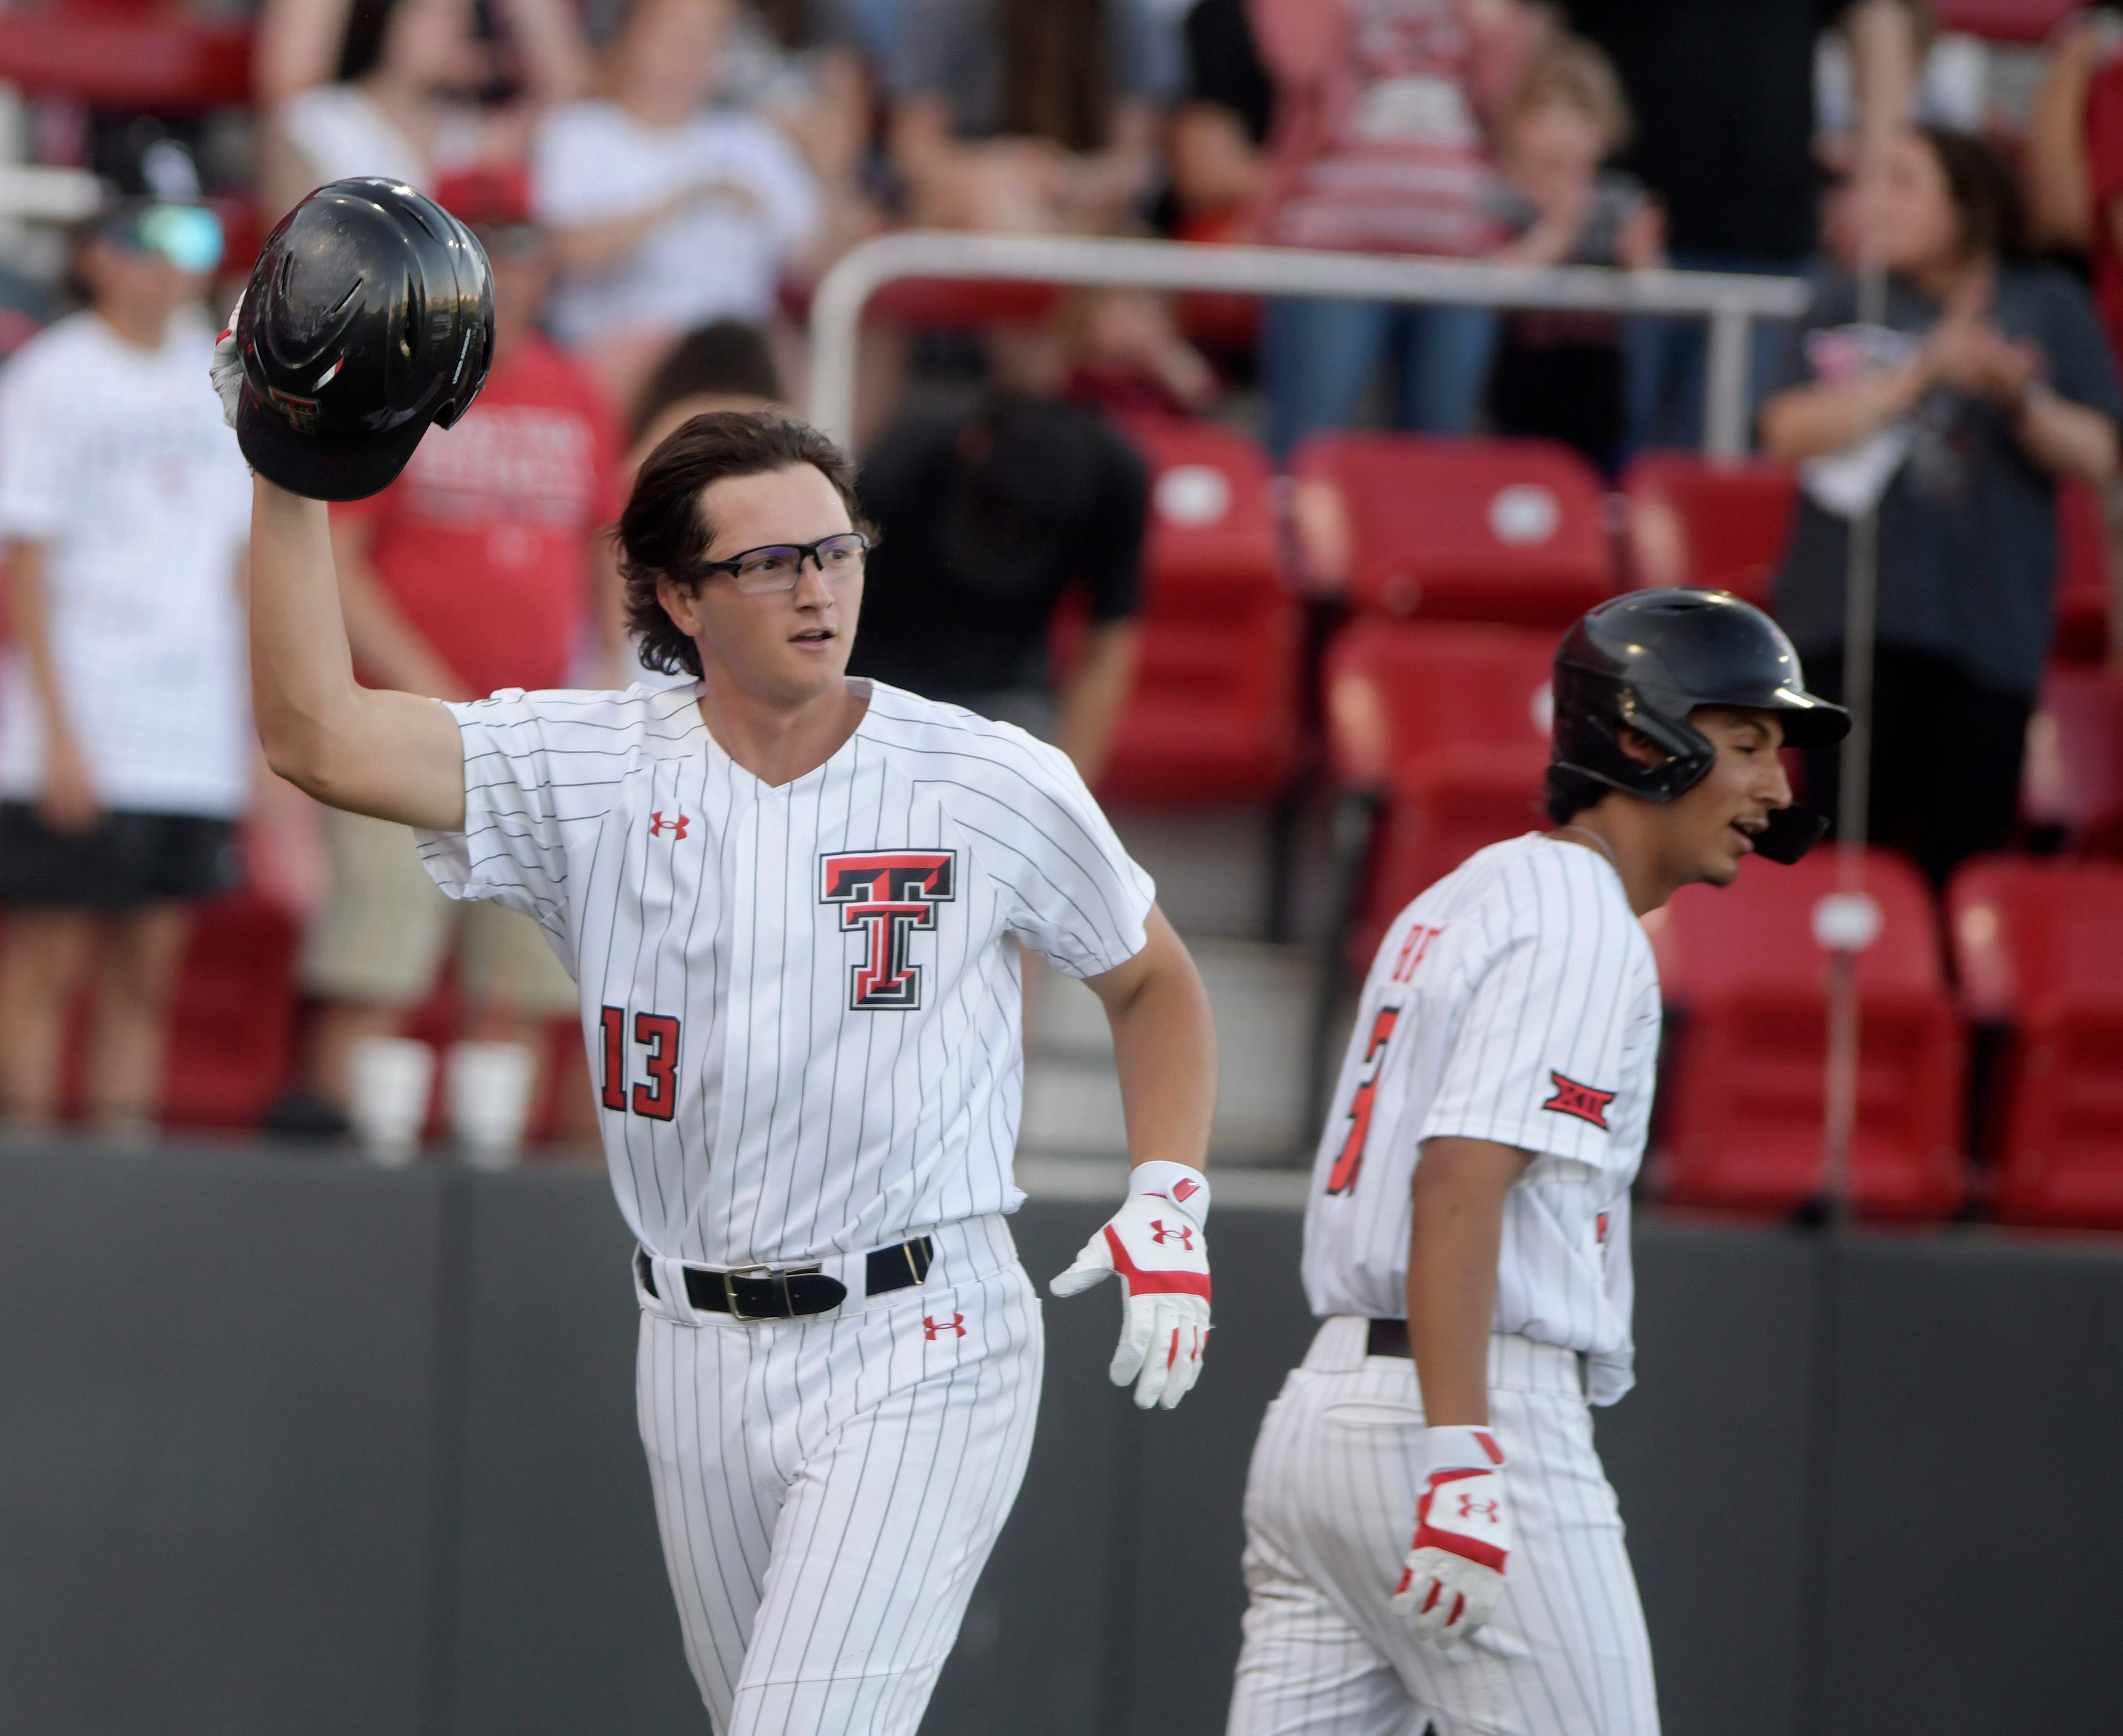 Two-year standout Gavin Kash will be a big loss for Texas Tech via the transfer portal.